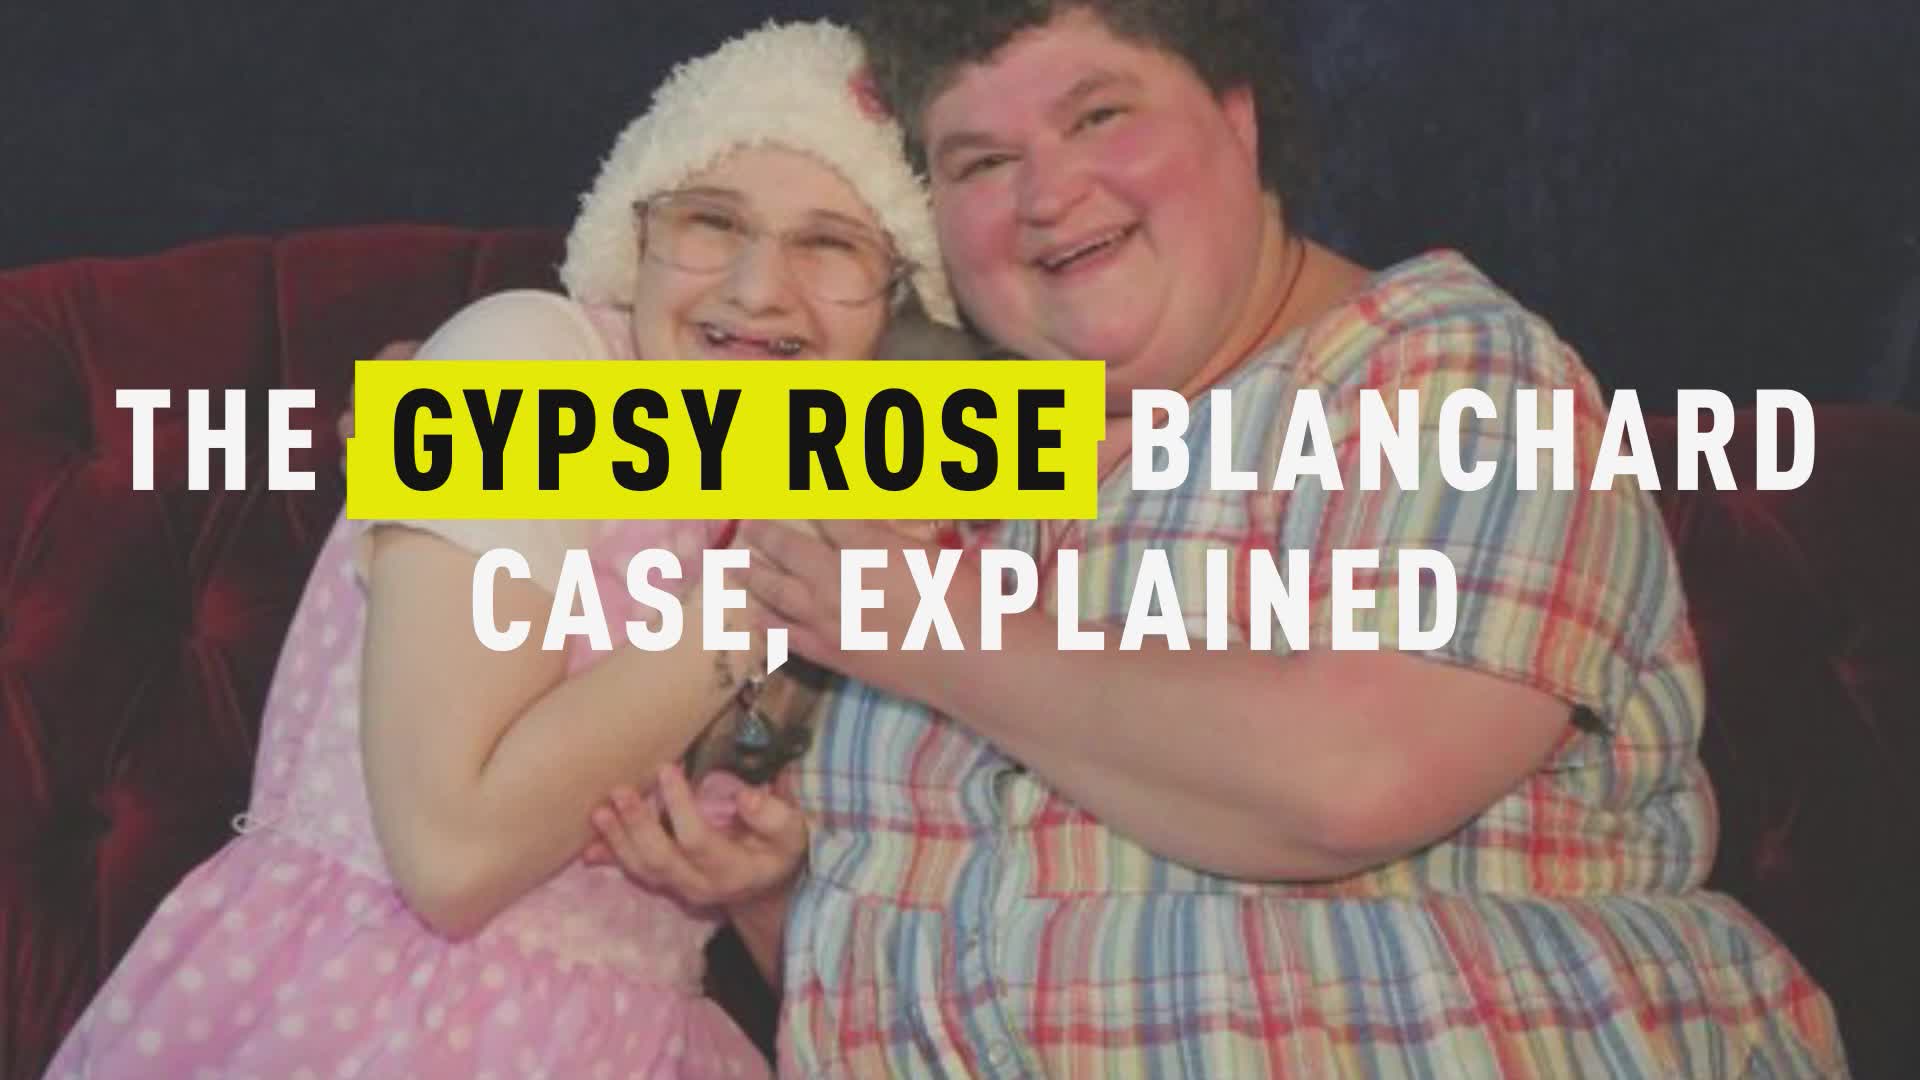 Watch The Gypsy Rose Blanchard Case, Explained | Famous Cases Explained